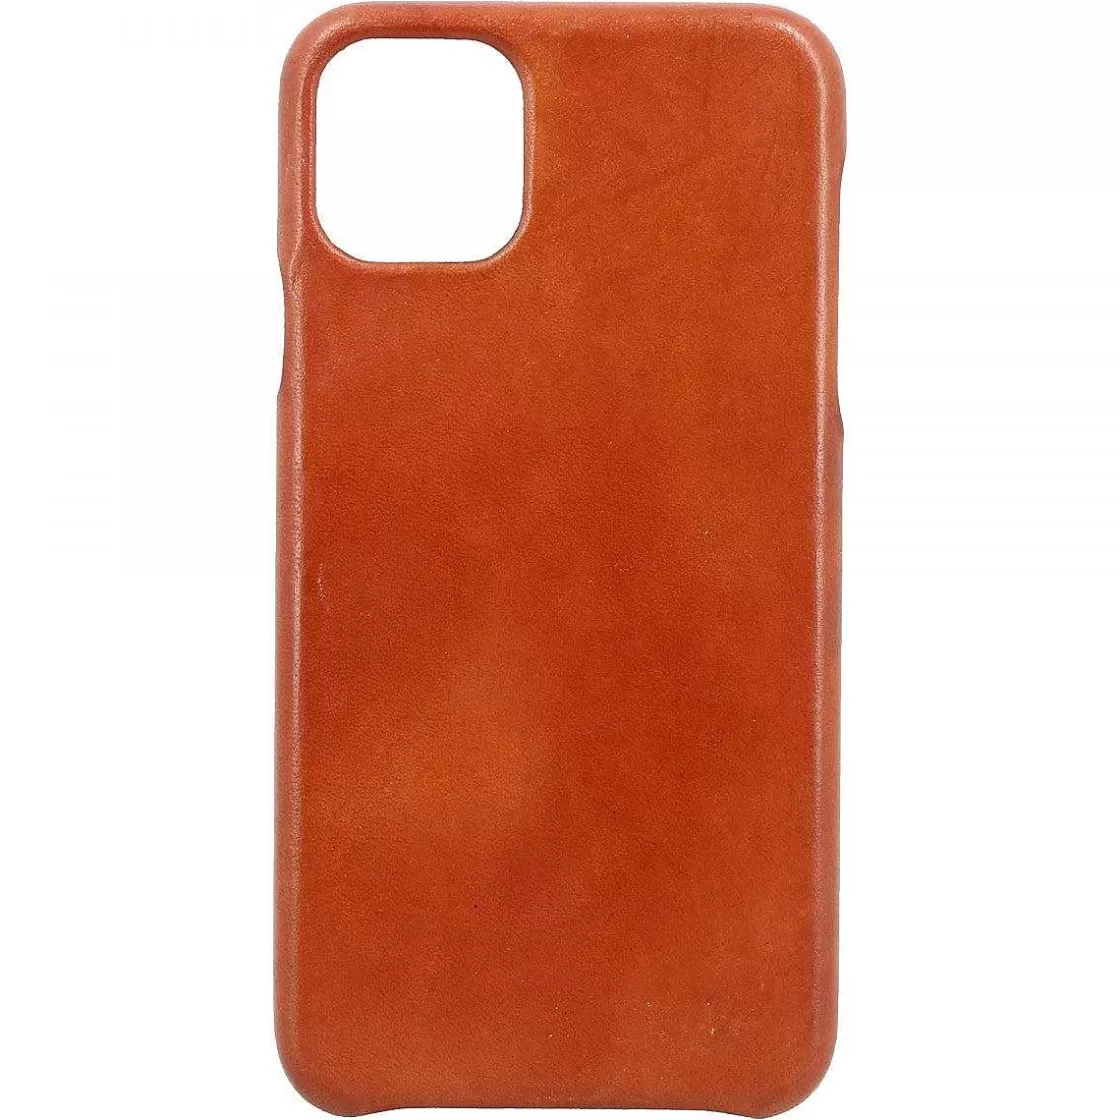 Leonardo Iphone Cover In Hand-Buffered Leather Leather Shop